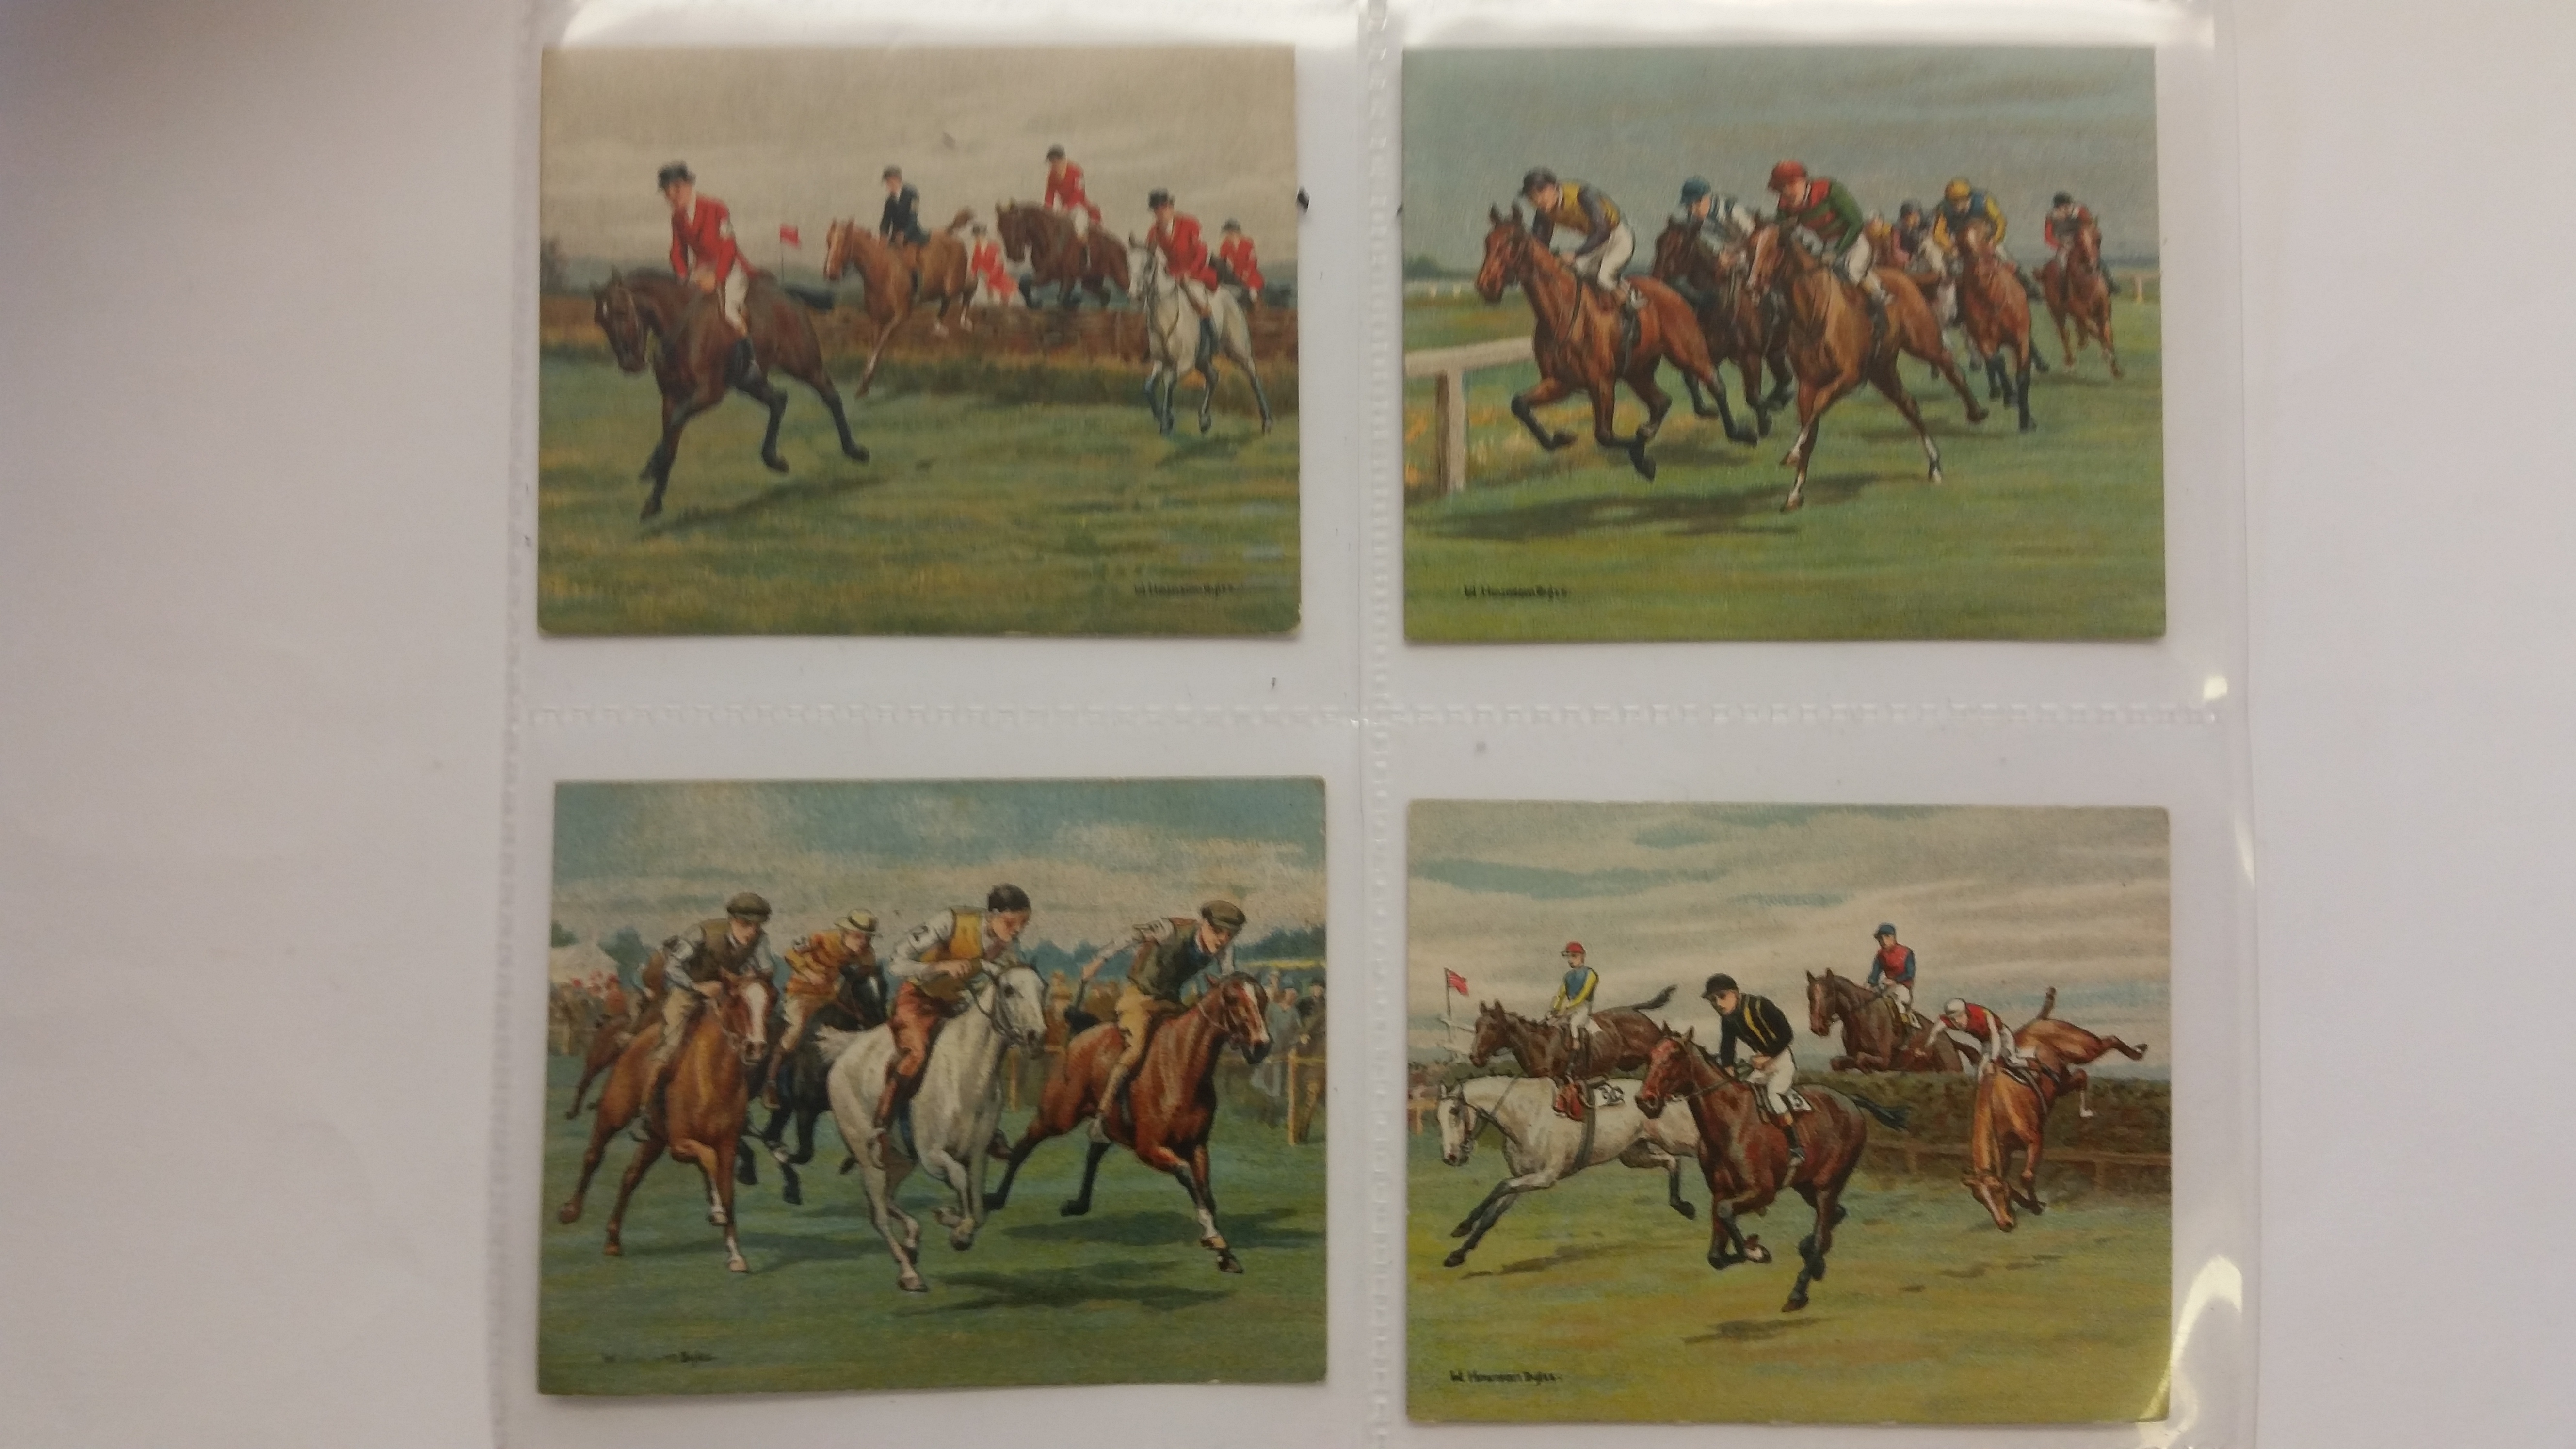 CARRERAS, Races - Historic & Modern, complete (3), premium, large & small, about VG to EX, 62